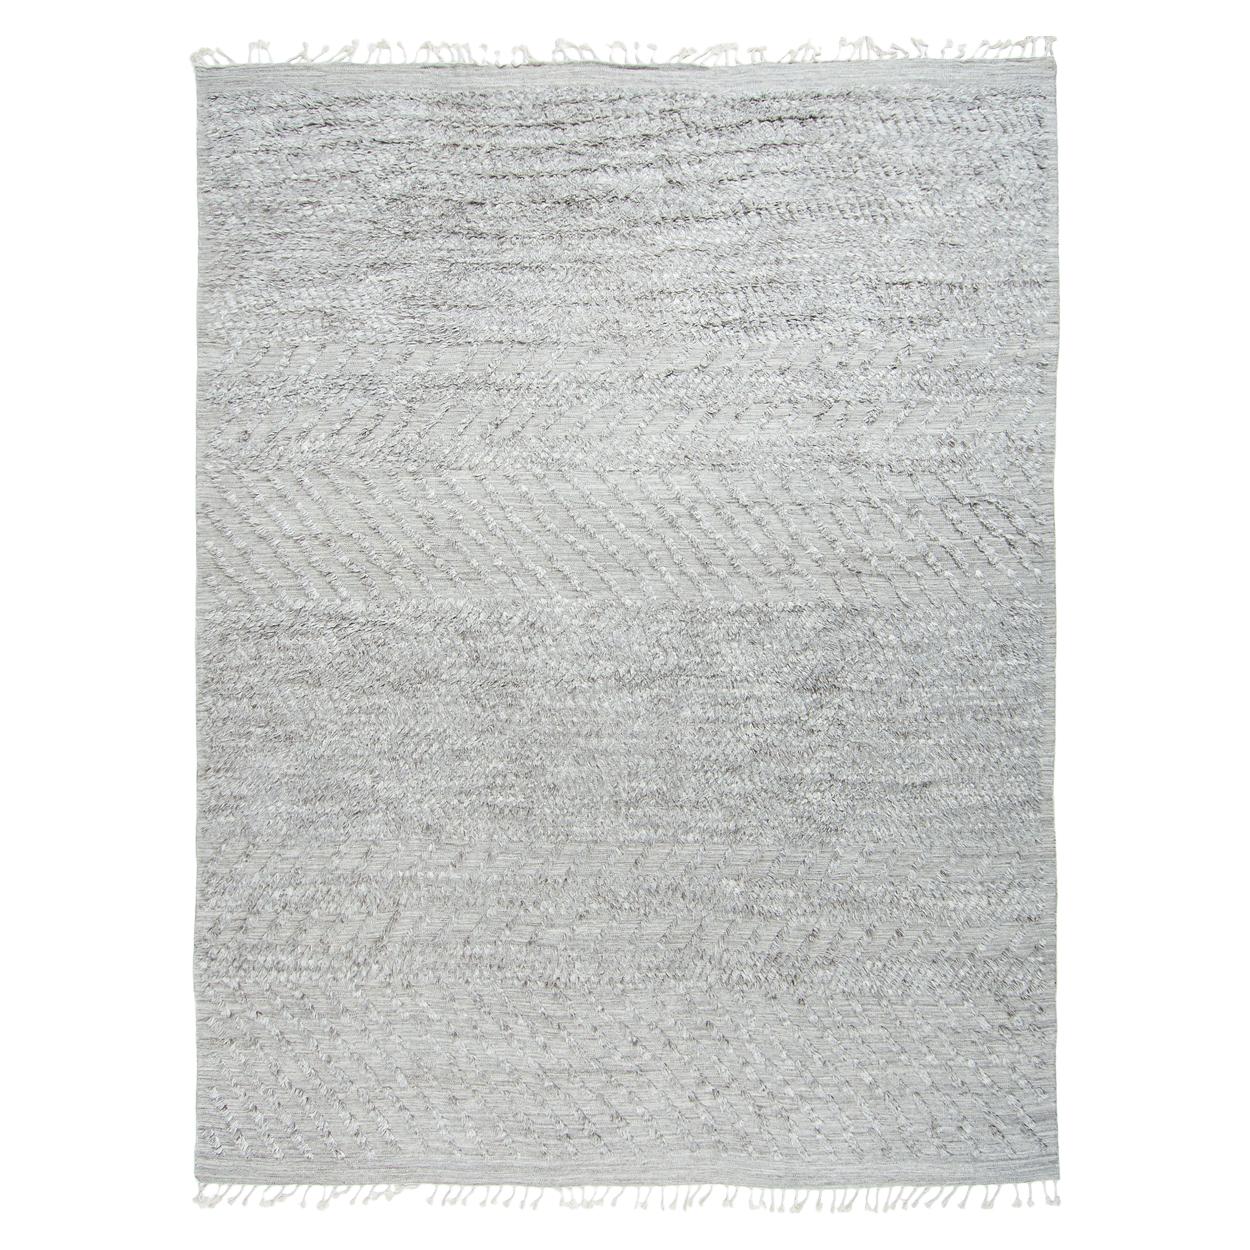 Modernist Collection Rug by Nazmiyal. Size: 13' 7" x 18' 7" (4.14 m x 5.66 m)